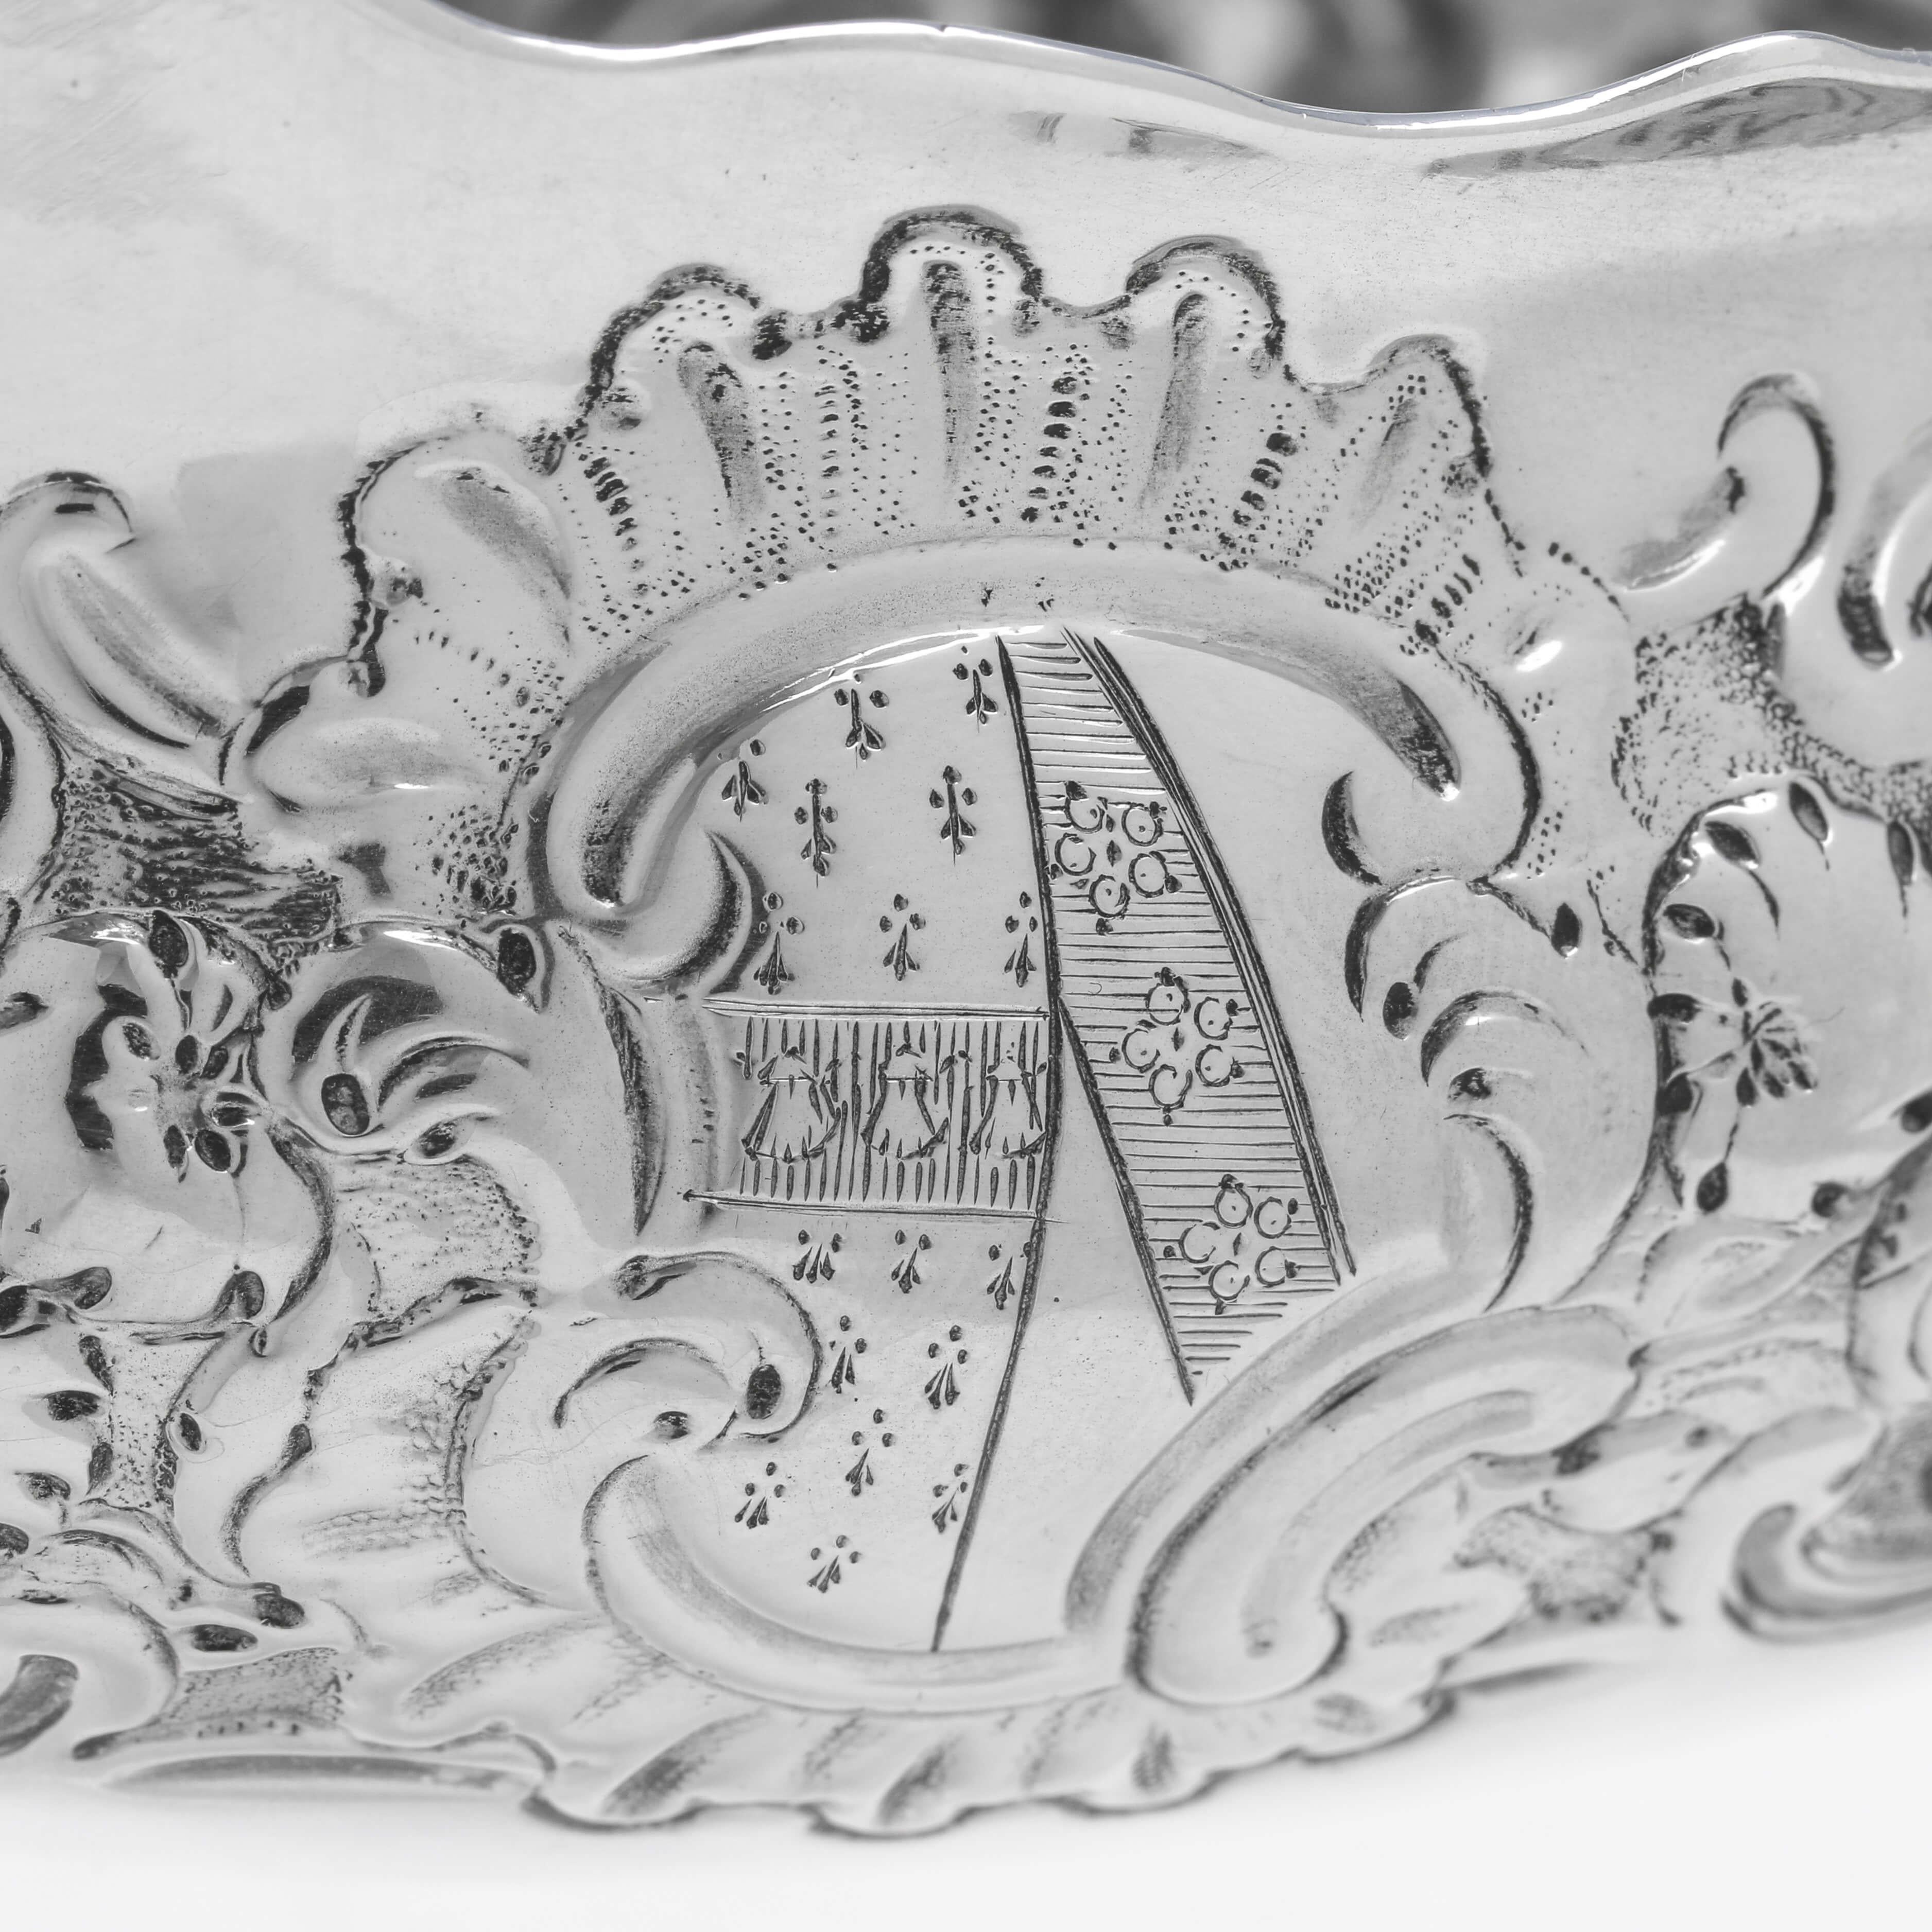 Rococo Period Antique Sterling Silver Pair of Sauce Boats London 1746 R. Kersill For Sale 1